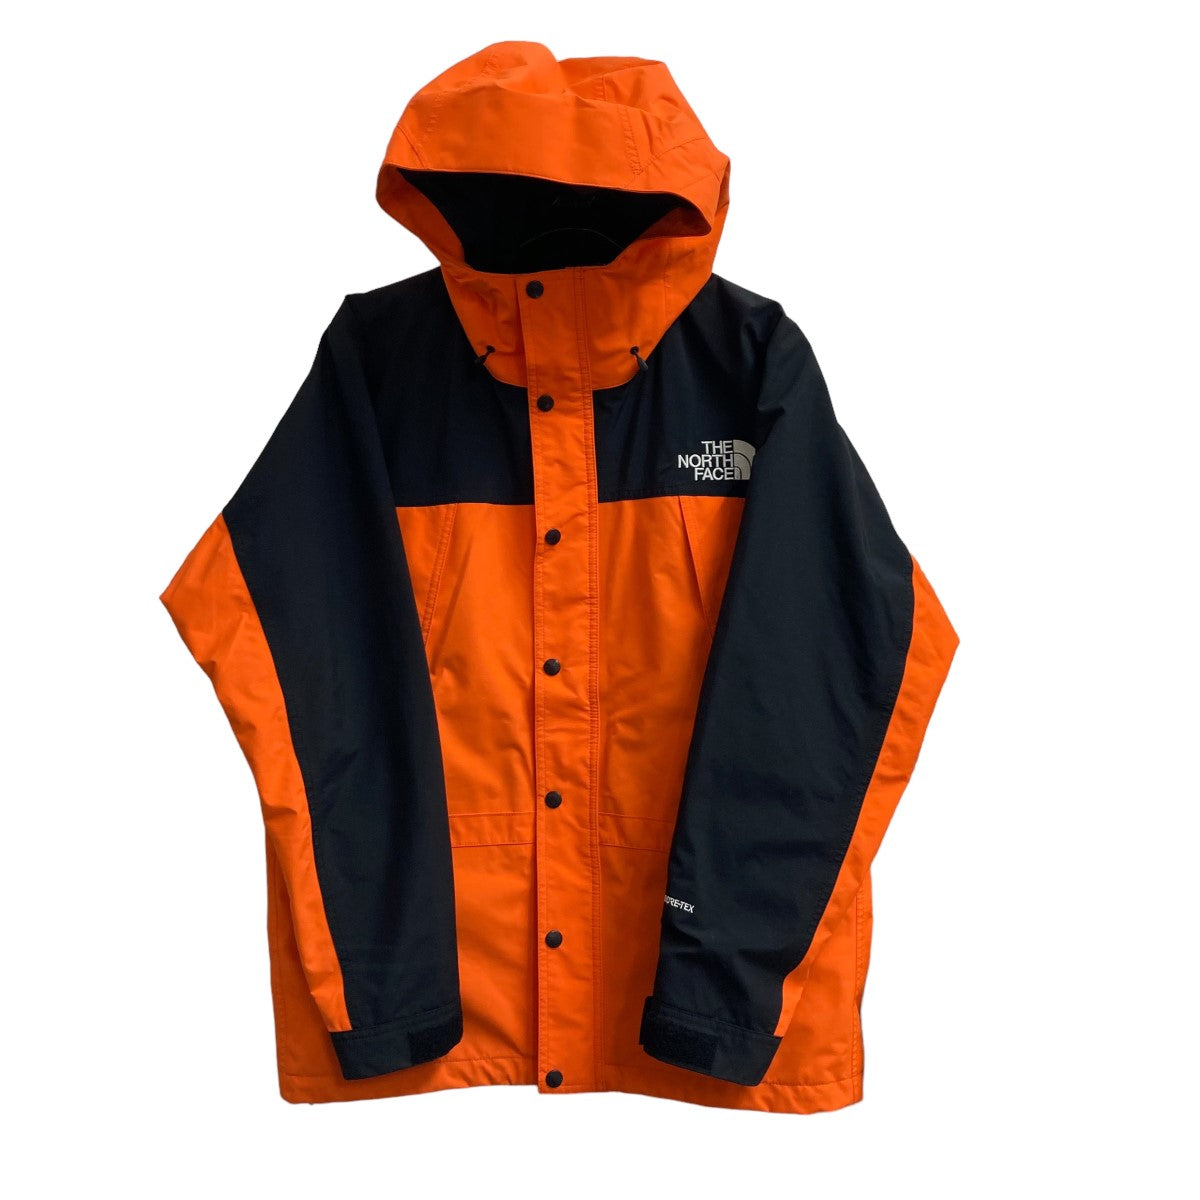 THE NORTH FACE(ザノースフェイス) Mountain Light Jacket NP11834 